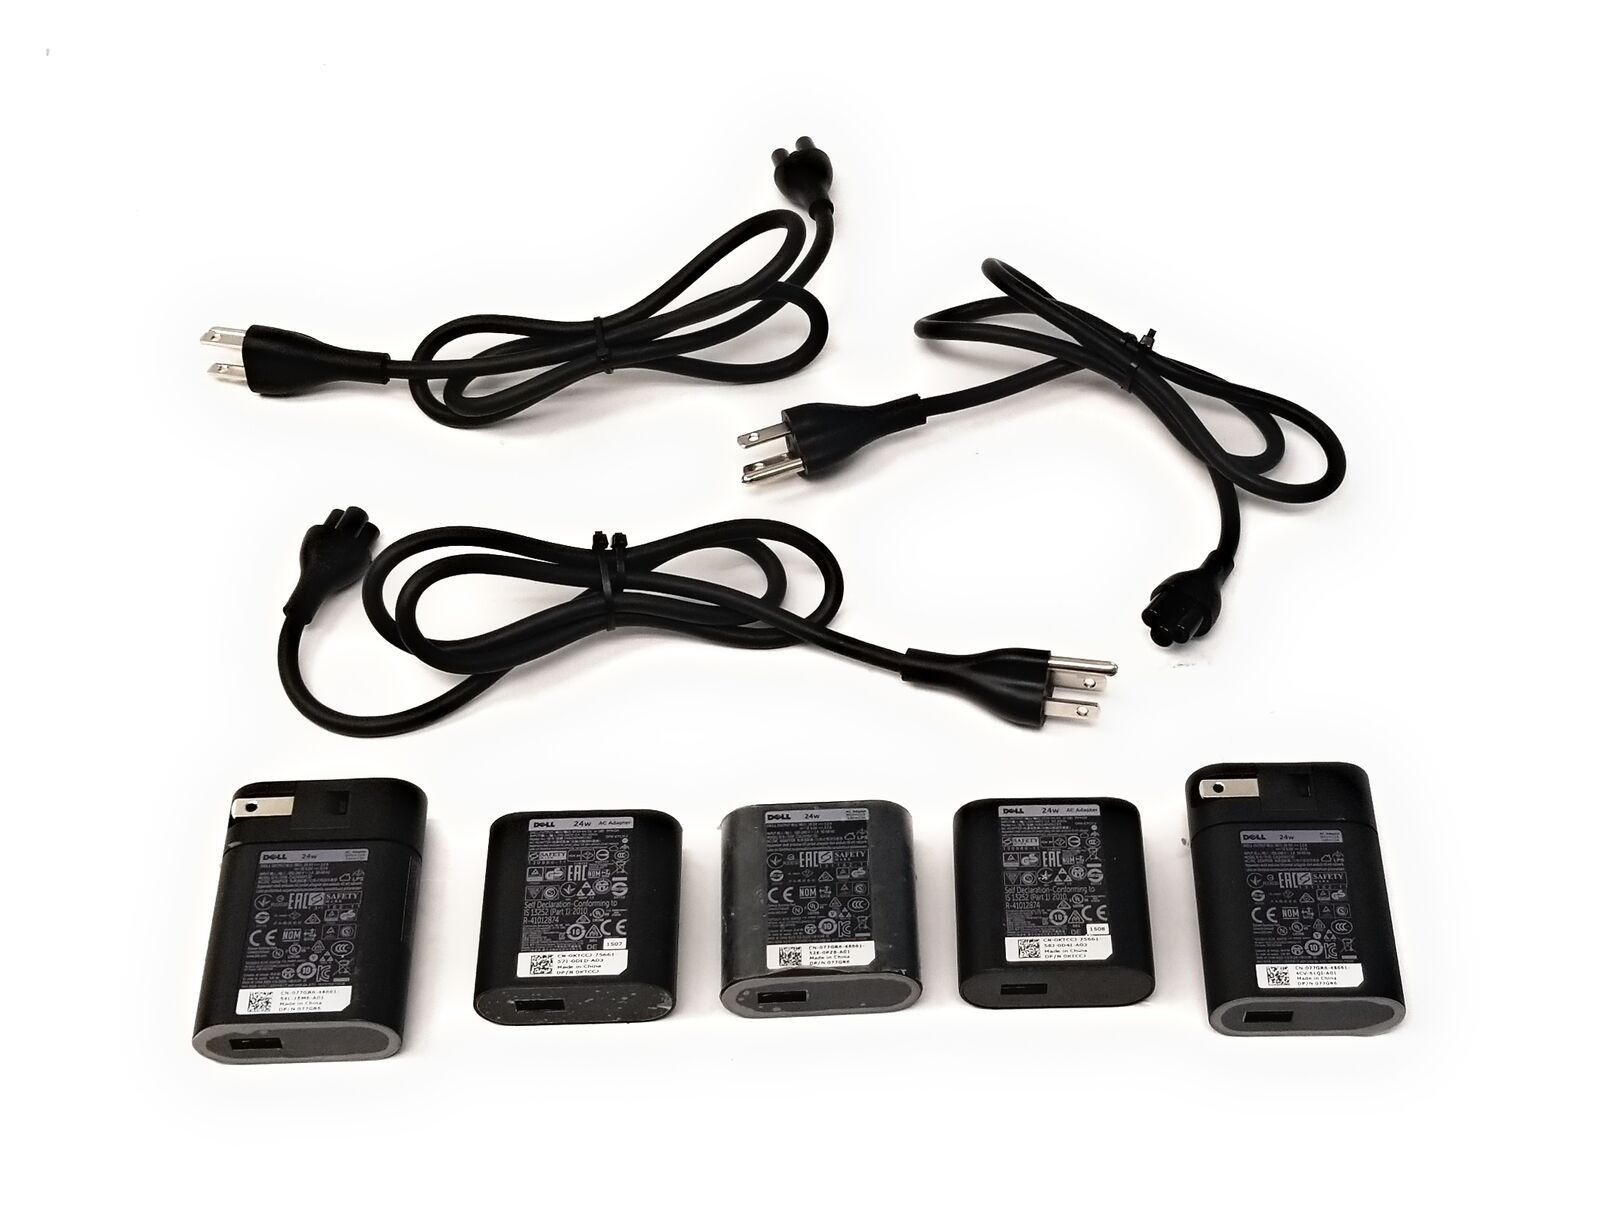 Lot of 5 OEM Dell Venue 11 Pro 24W 19.5V 1.2A Tablet Chargers USB Power Adapters